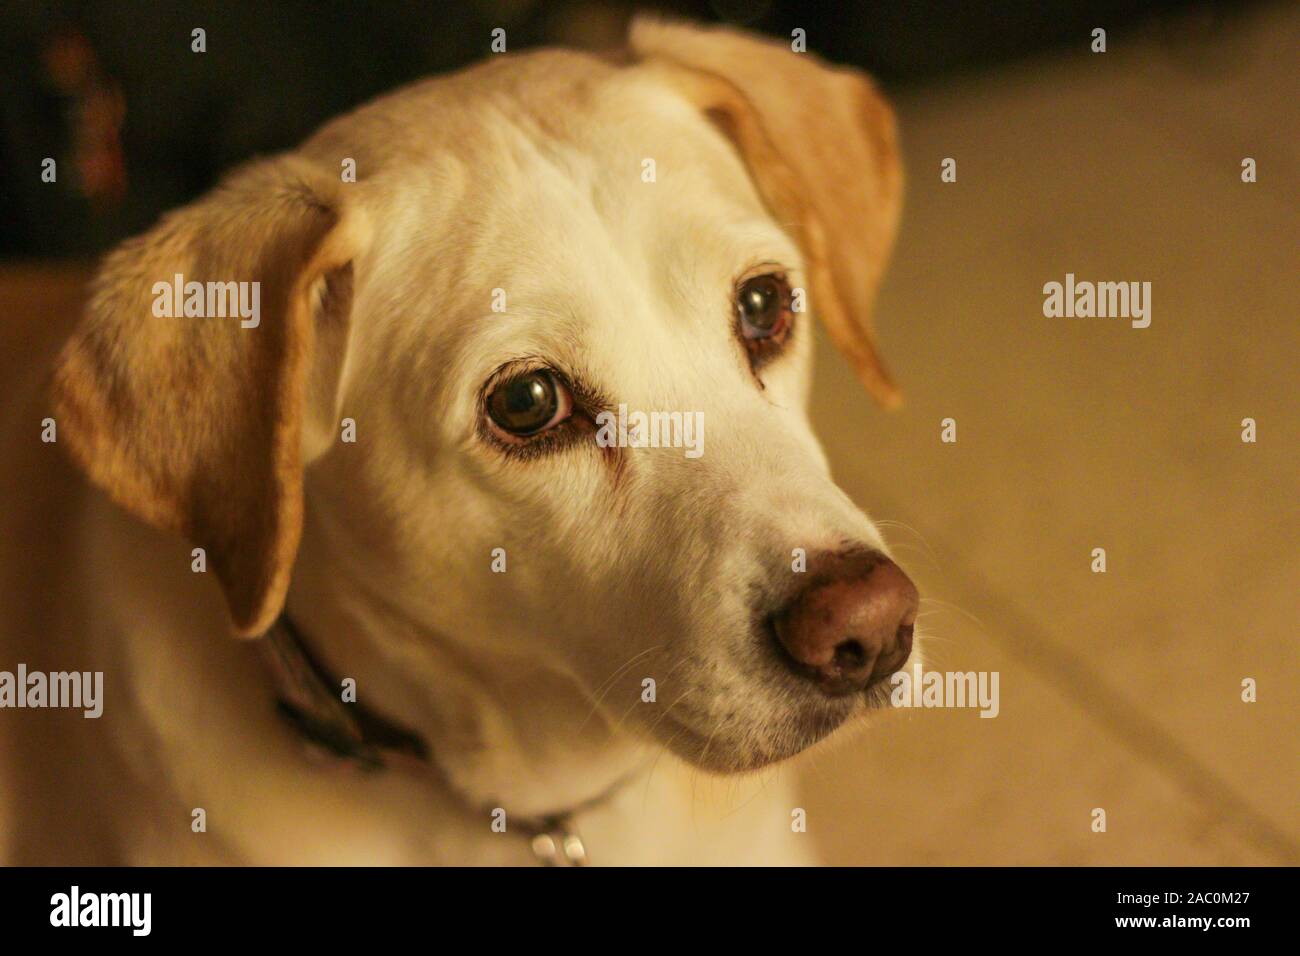 A Beagle And Lab Mix Dog With Sad Eyes Close Up A Popular Crossbreed From Two Popular Parents The Beagle And The Labrador Both Breeds Are Known Fo Stock Photo Alamy